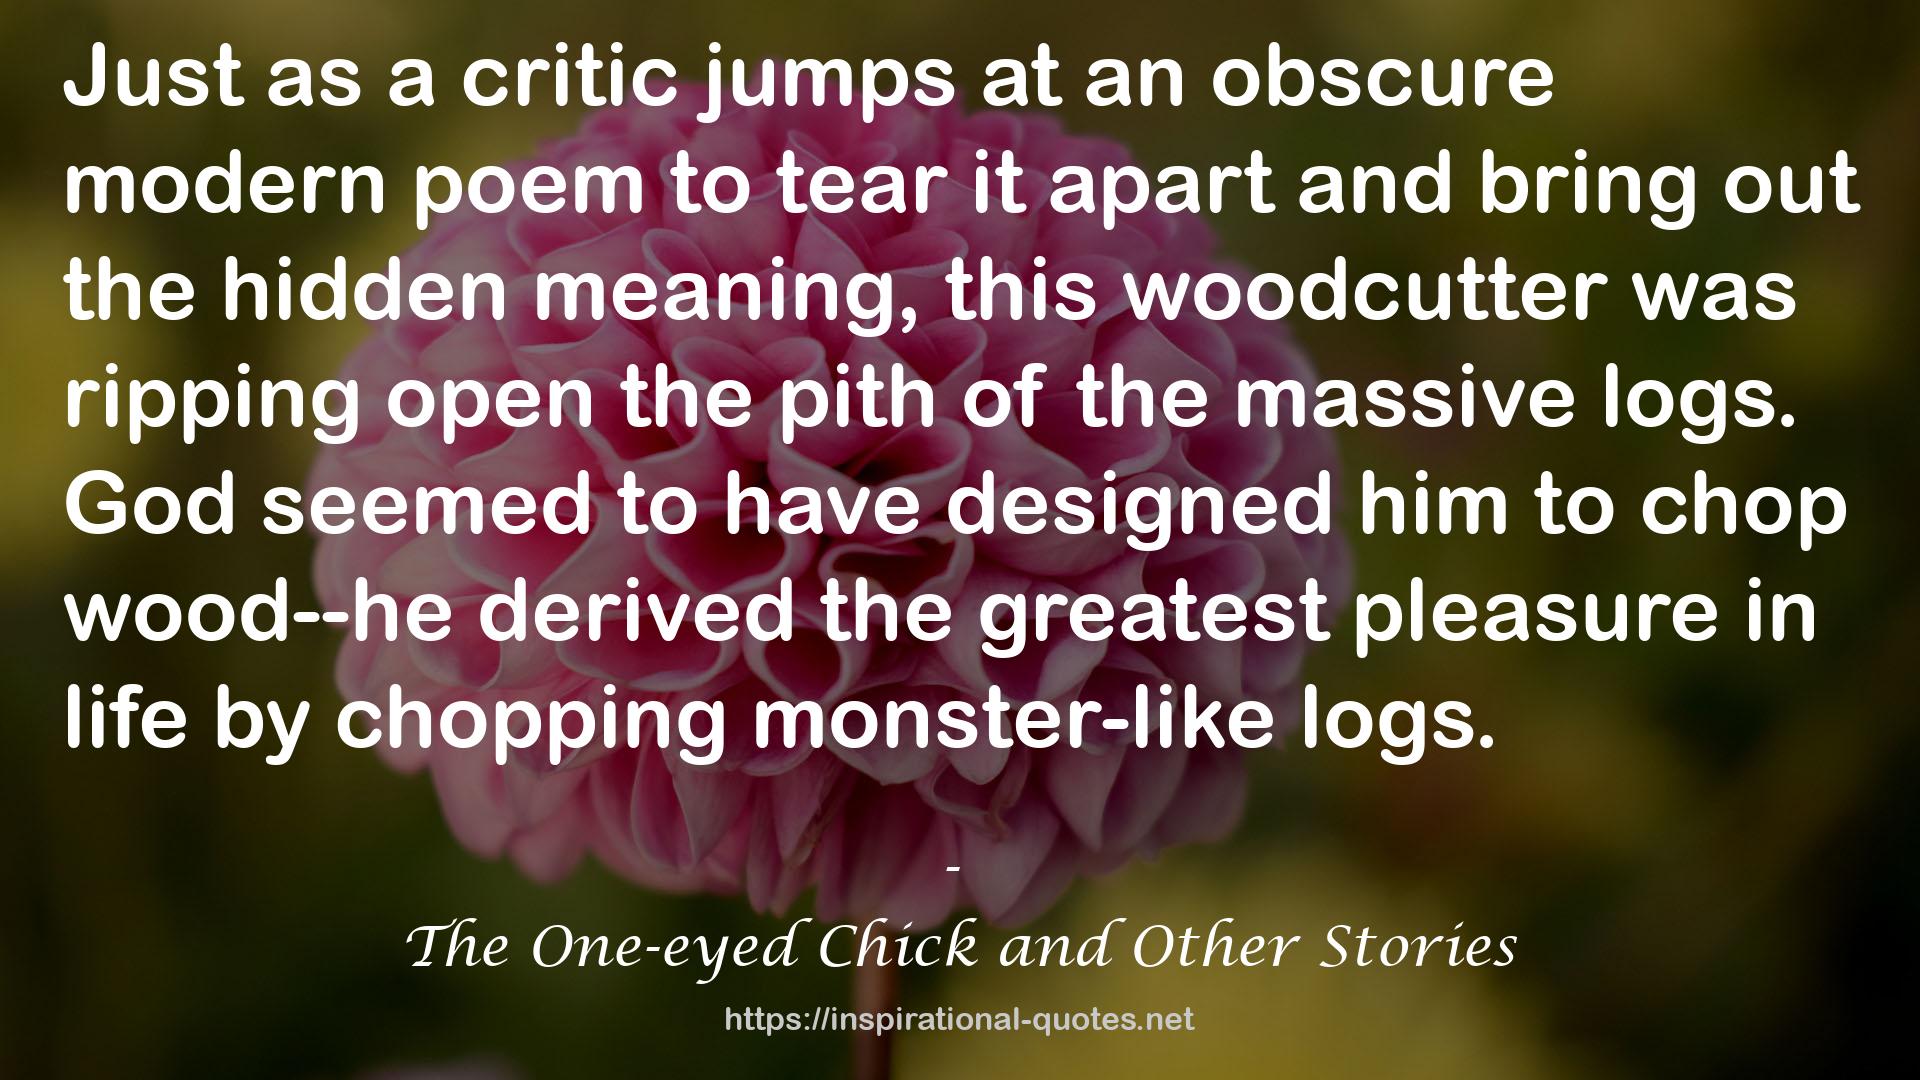 The One-eyed Chick and Other Stories QUOTES